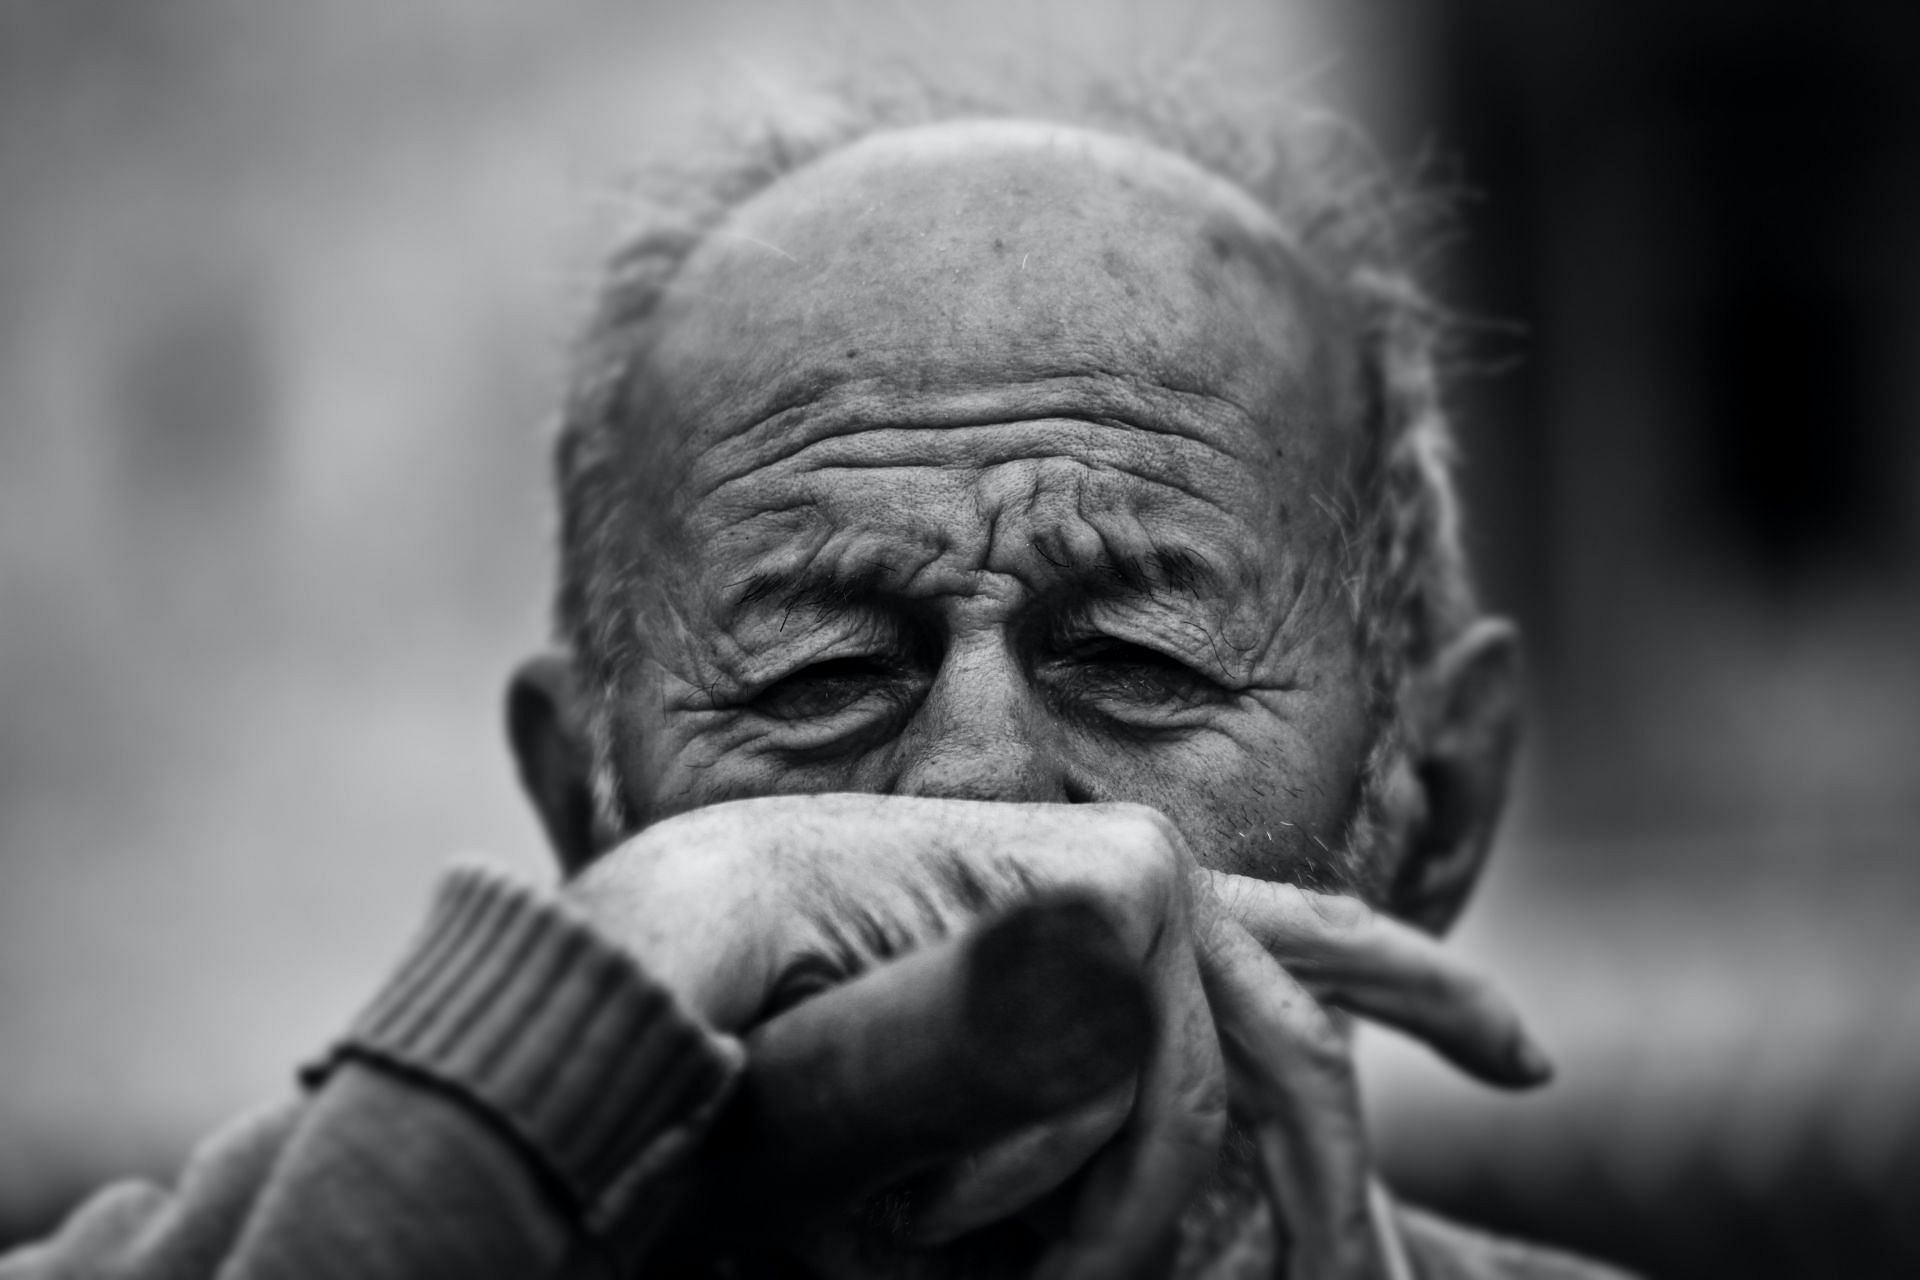 Recognizing early signs of dementia in men gives a chance for better treatment. (Image via Unsplash/Rad Cyrus)